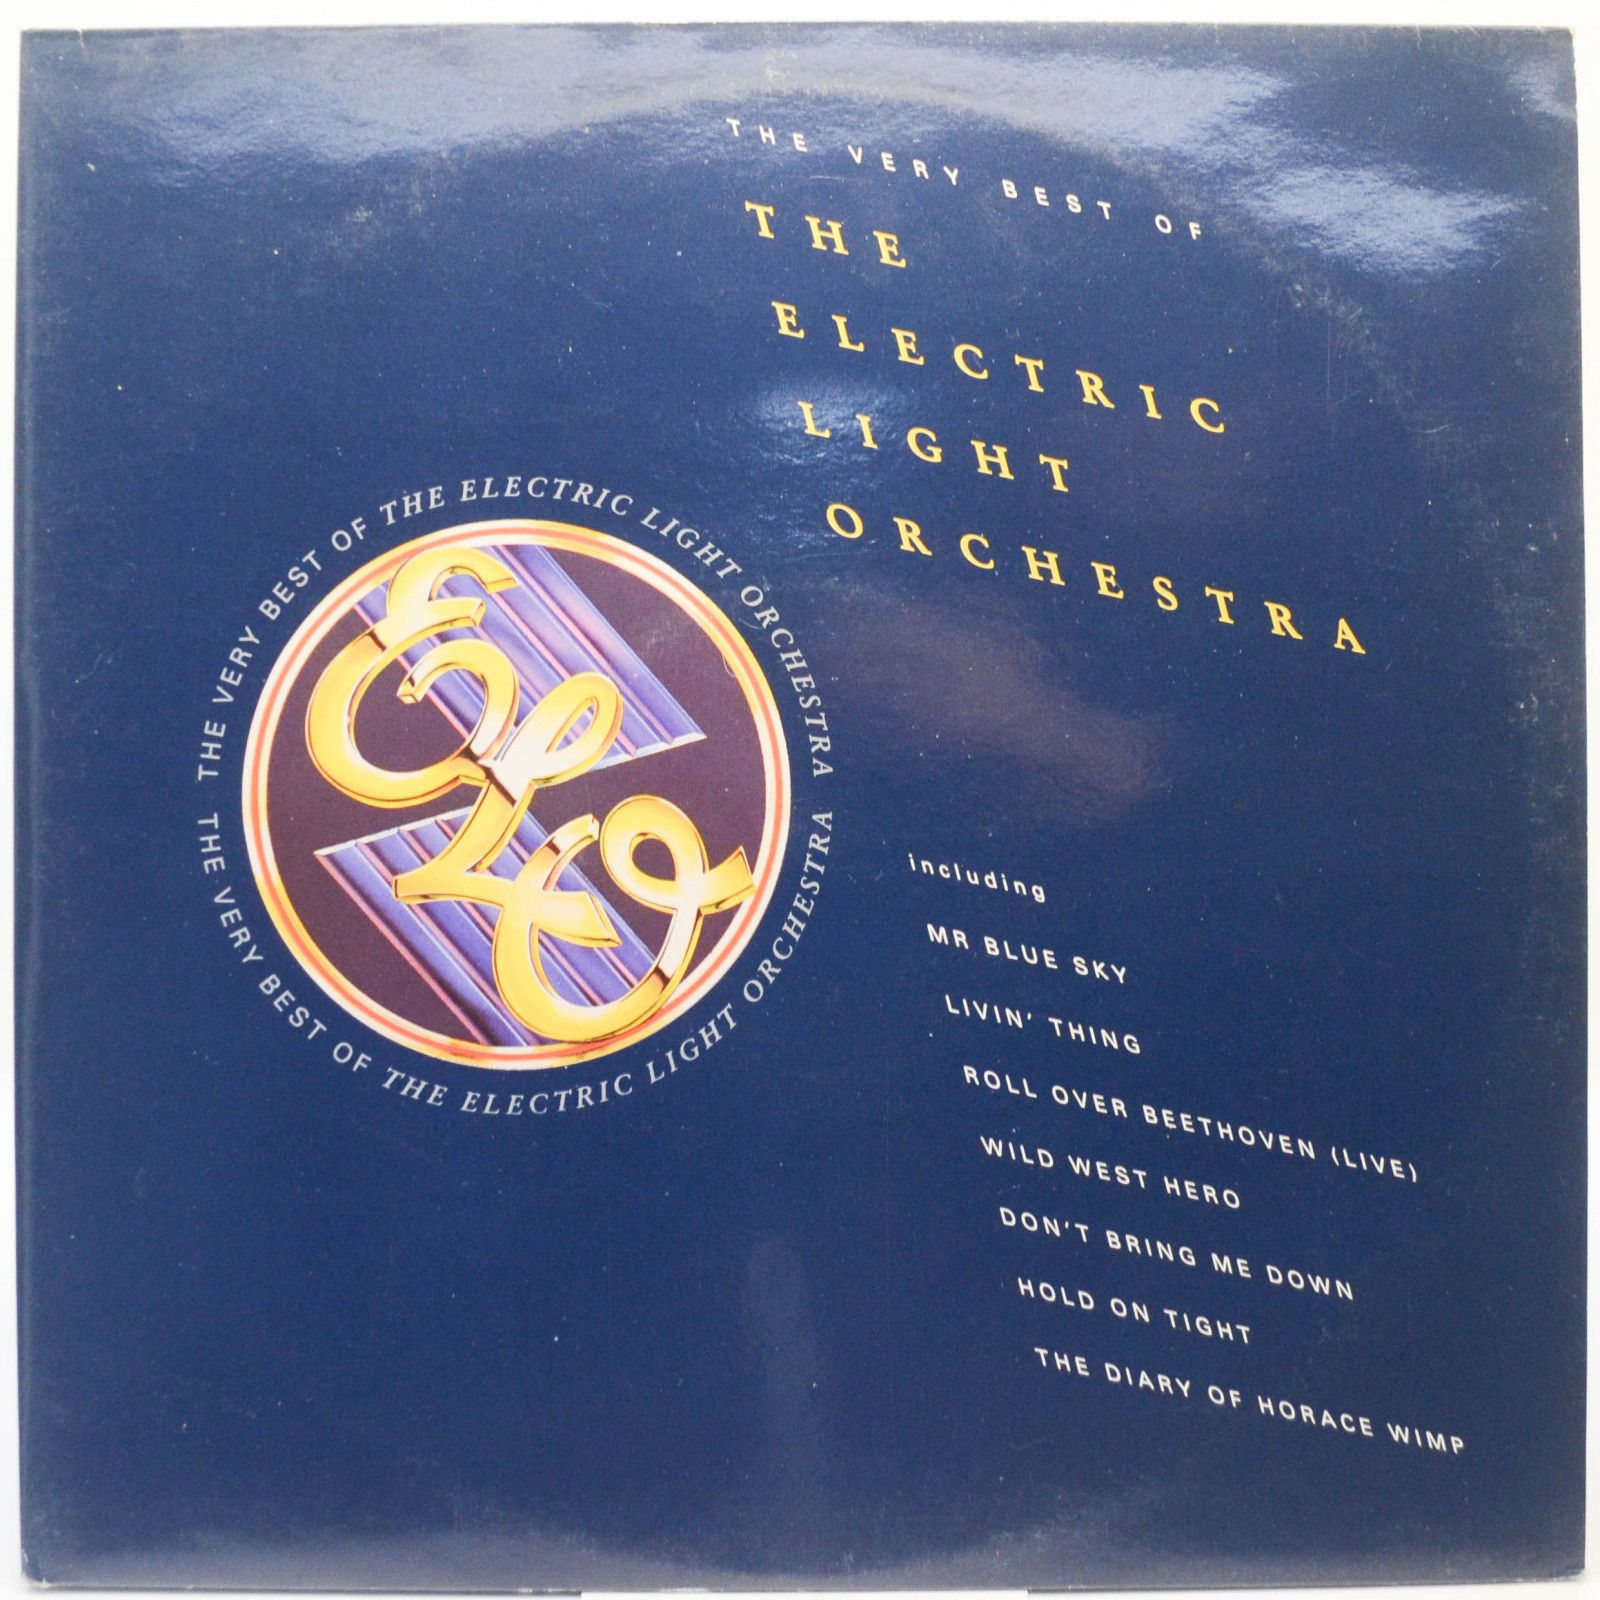 Electric Light Orchestra — The Very Best Of The Electric Light Orchestra (2LP, UK), 1989